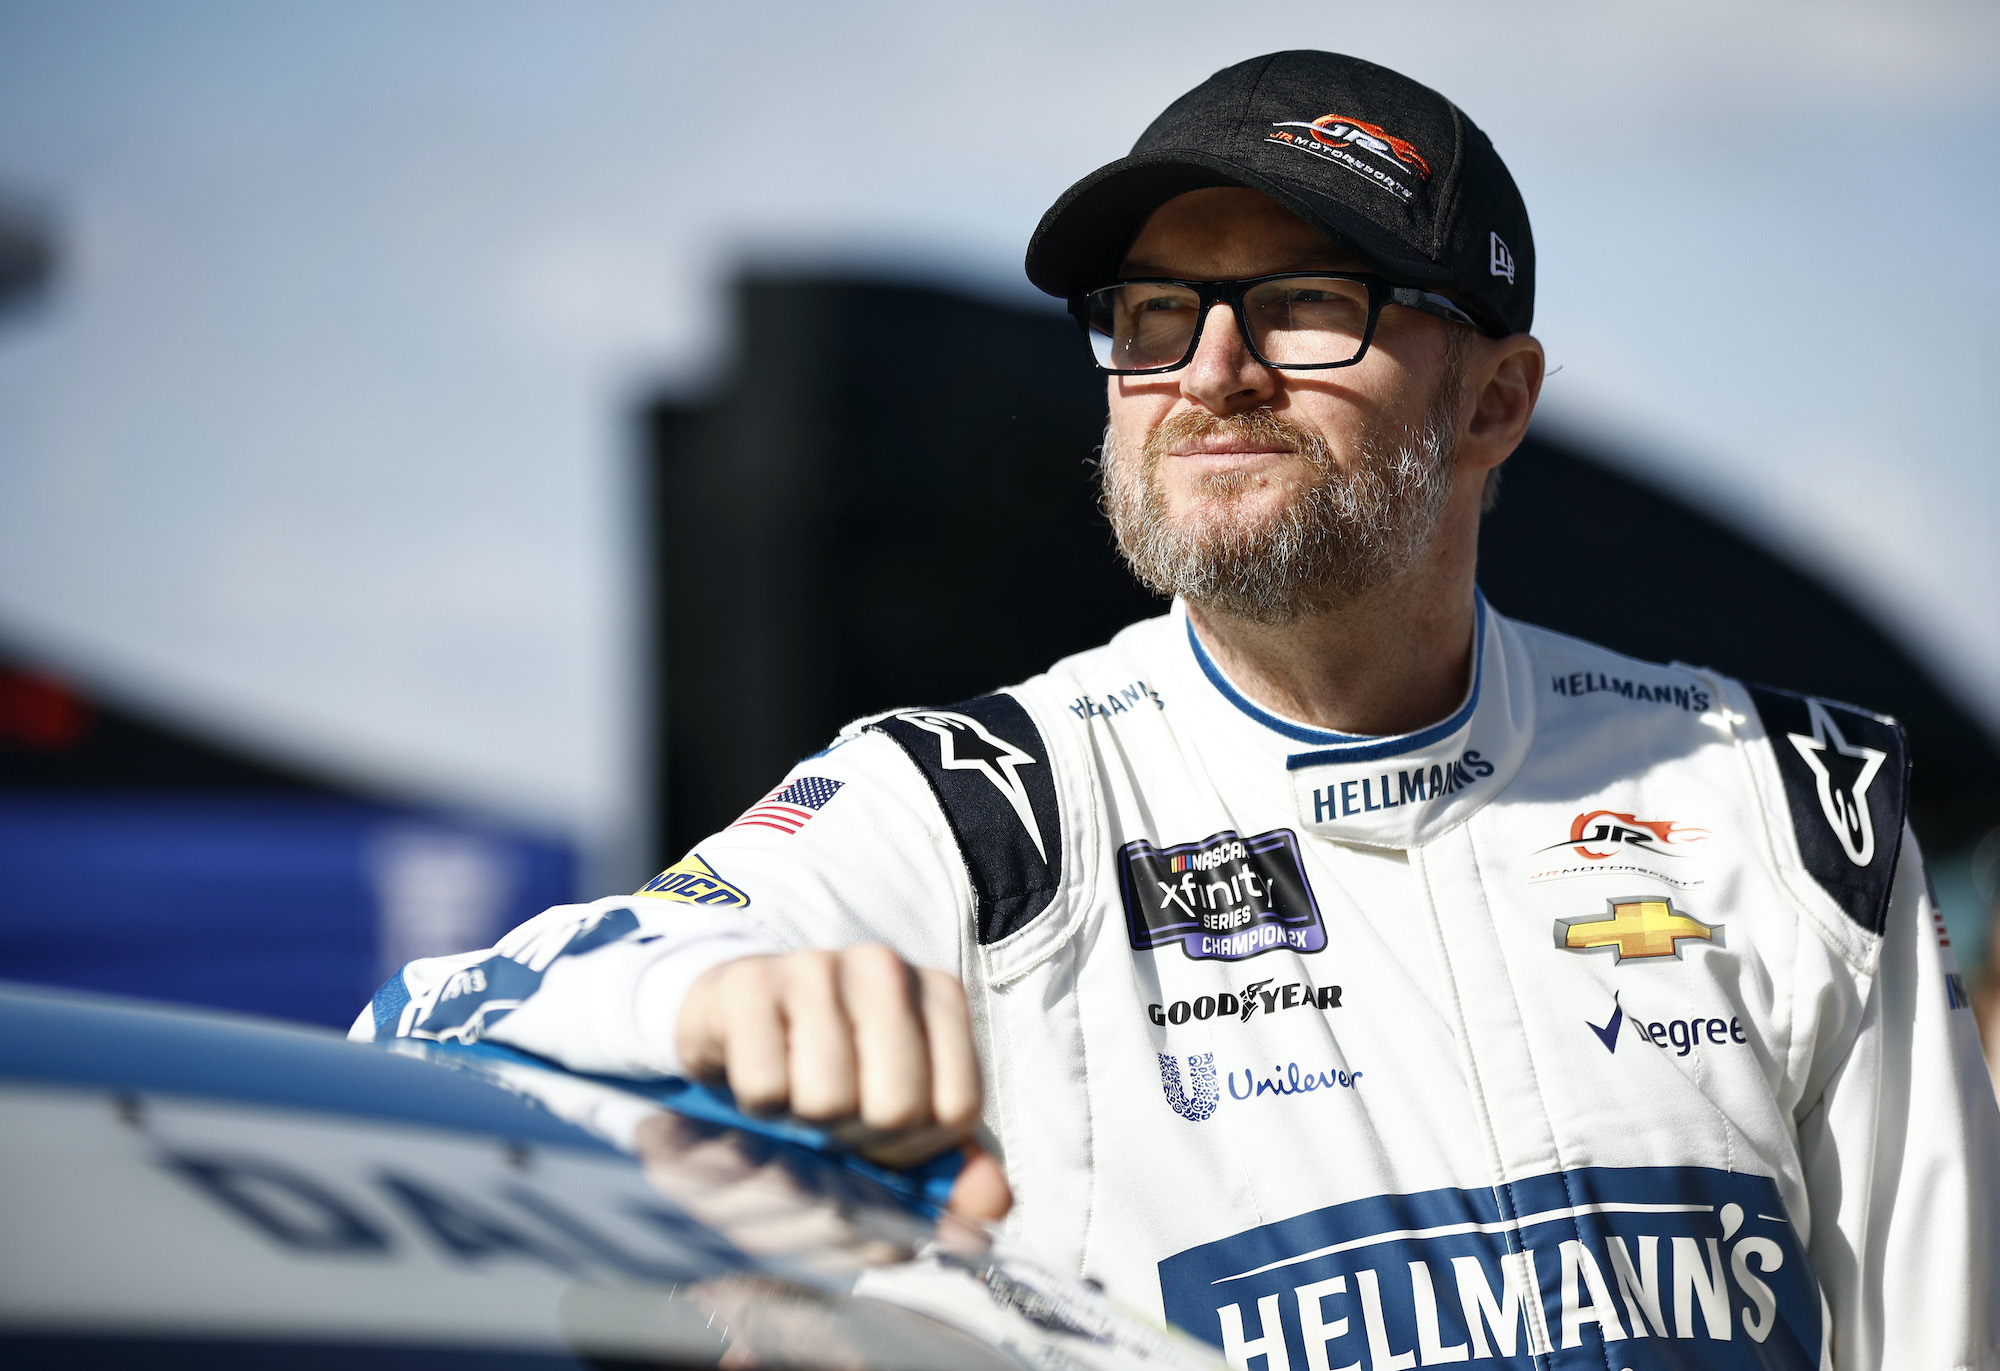 Dale Earnhardt Jr. Forgives NASCAR During Martinsville Race for How Organization Treated Him in Another Race Years Earlier: 'We're Even NASCAR'